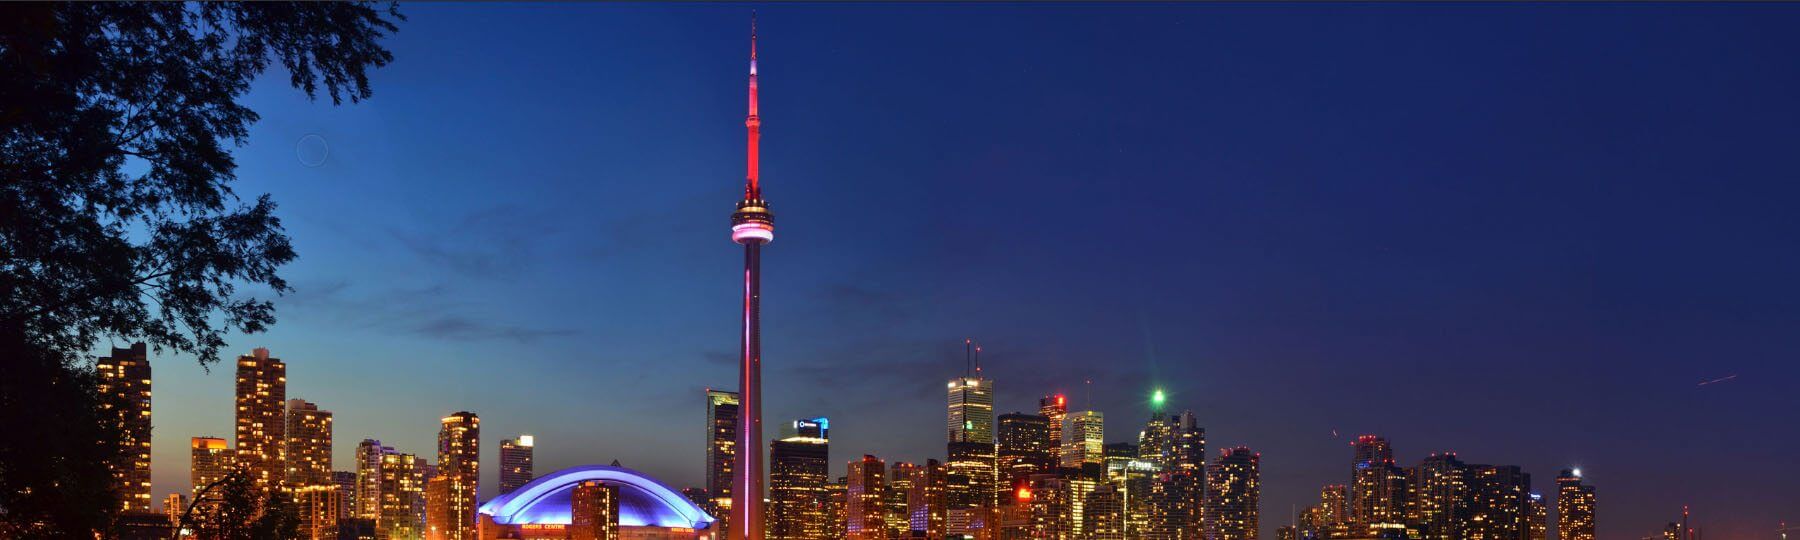 a view of CN Tower at night